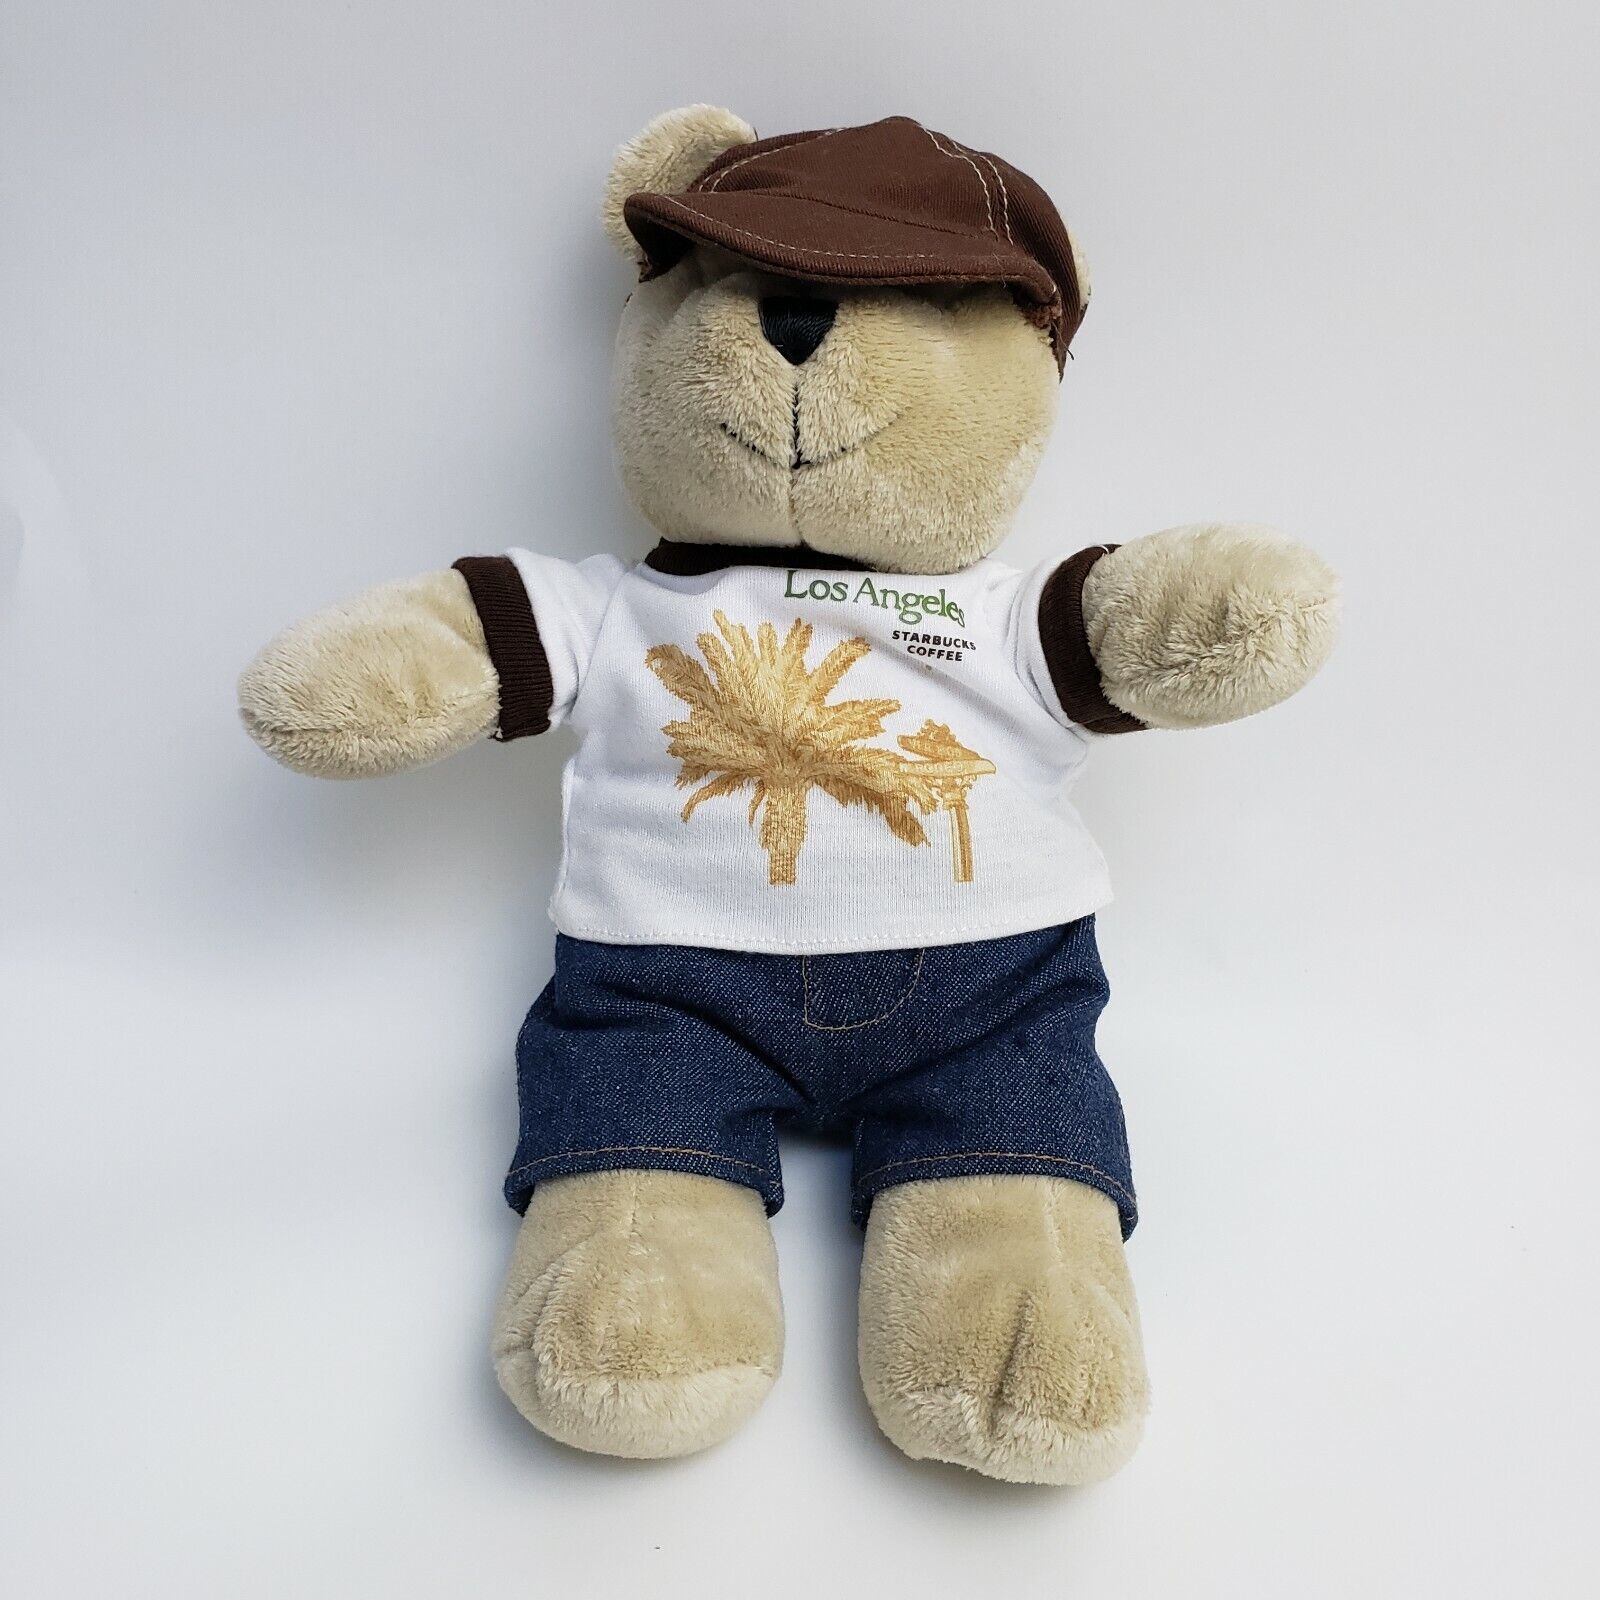 Primary image for Starbucks Coffee Collectible Bearista Bear 10" Los Angeles 2009 Destination